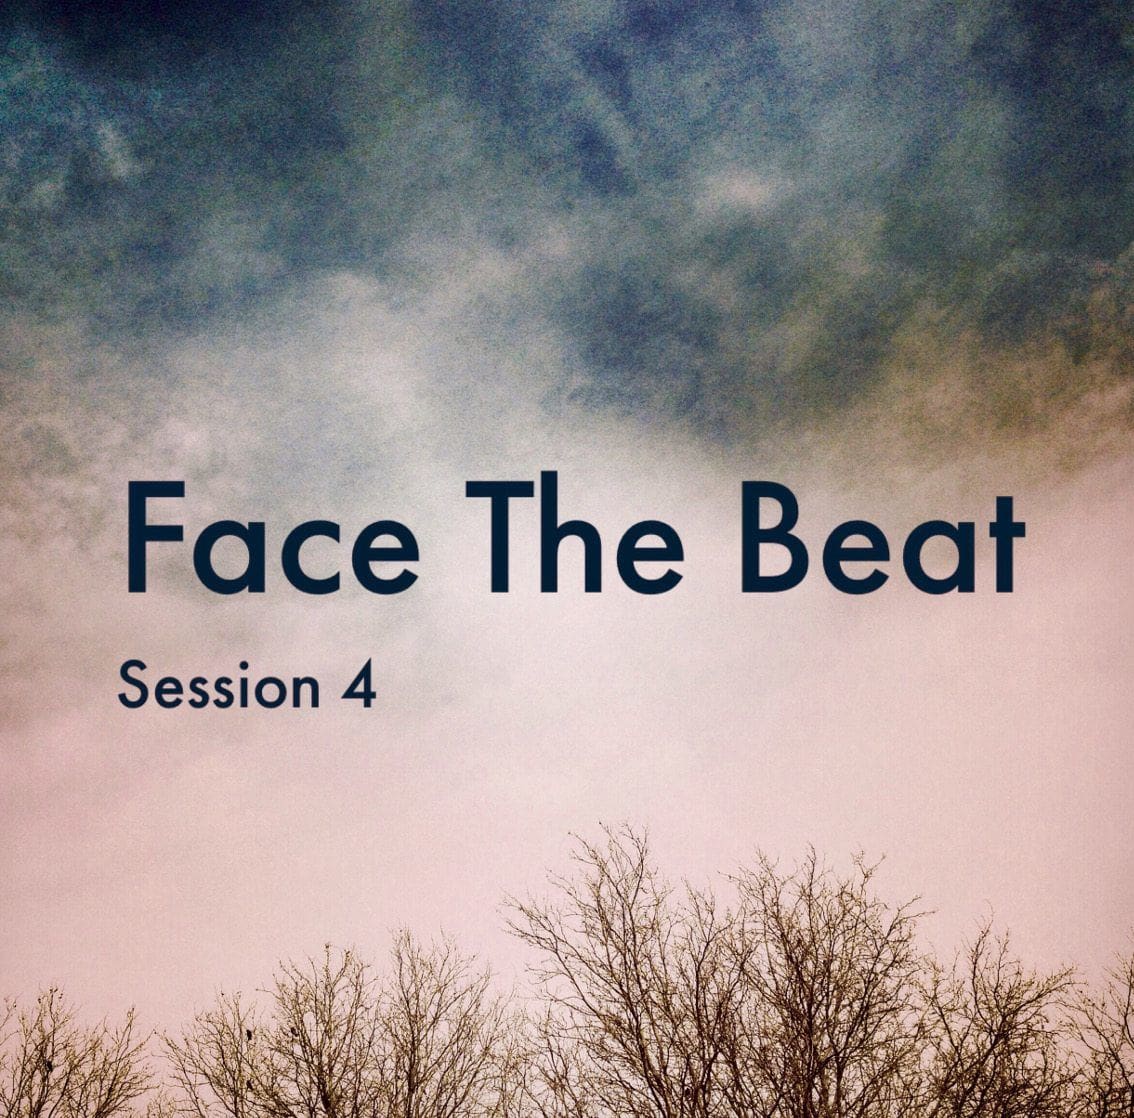 Free download mega-compilation'Face The Beat: Session 4' is now available - 90 tracks from the absolute industrial underground!